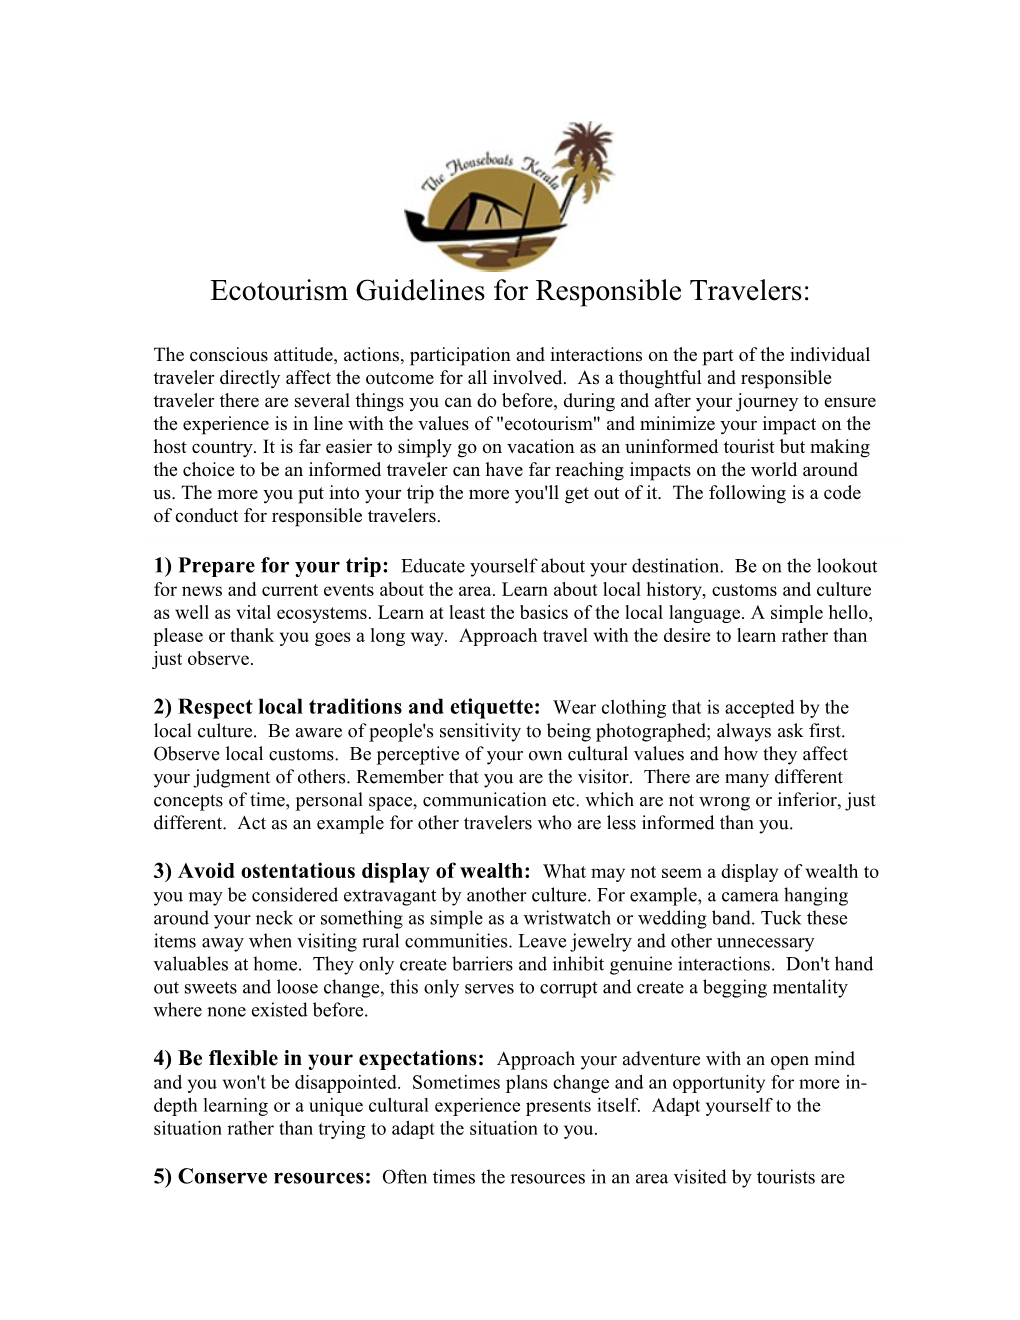 Ecotourism Guidelines for Responsible Travelers